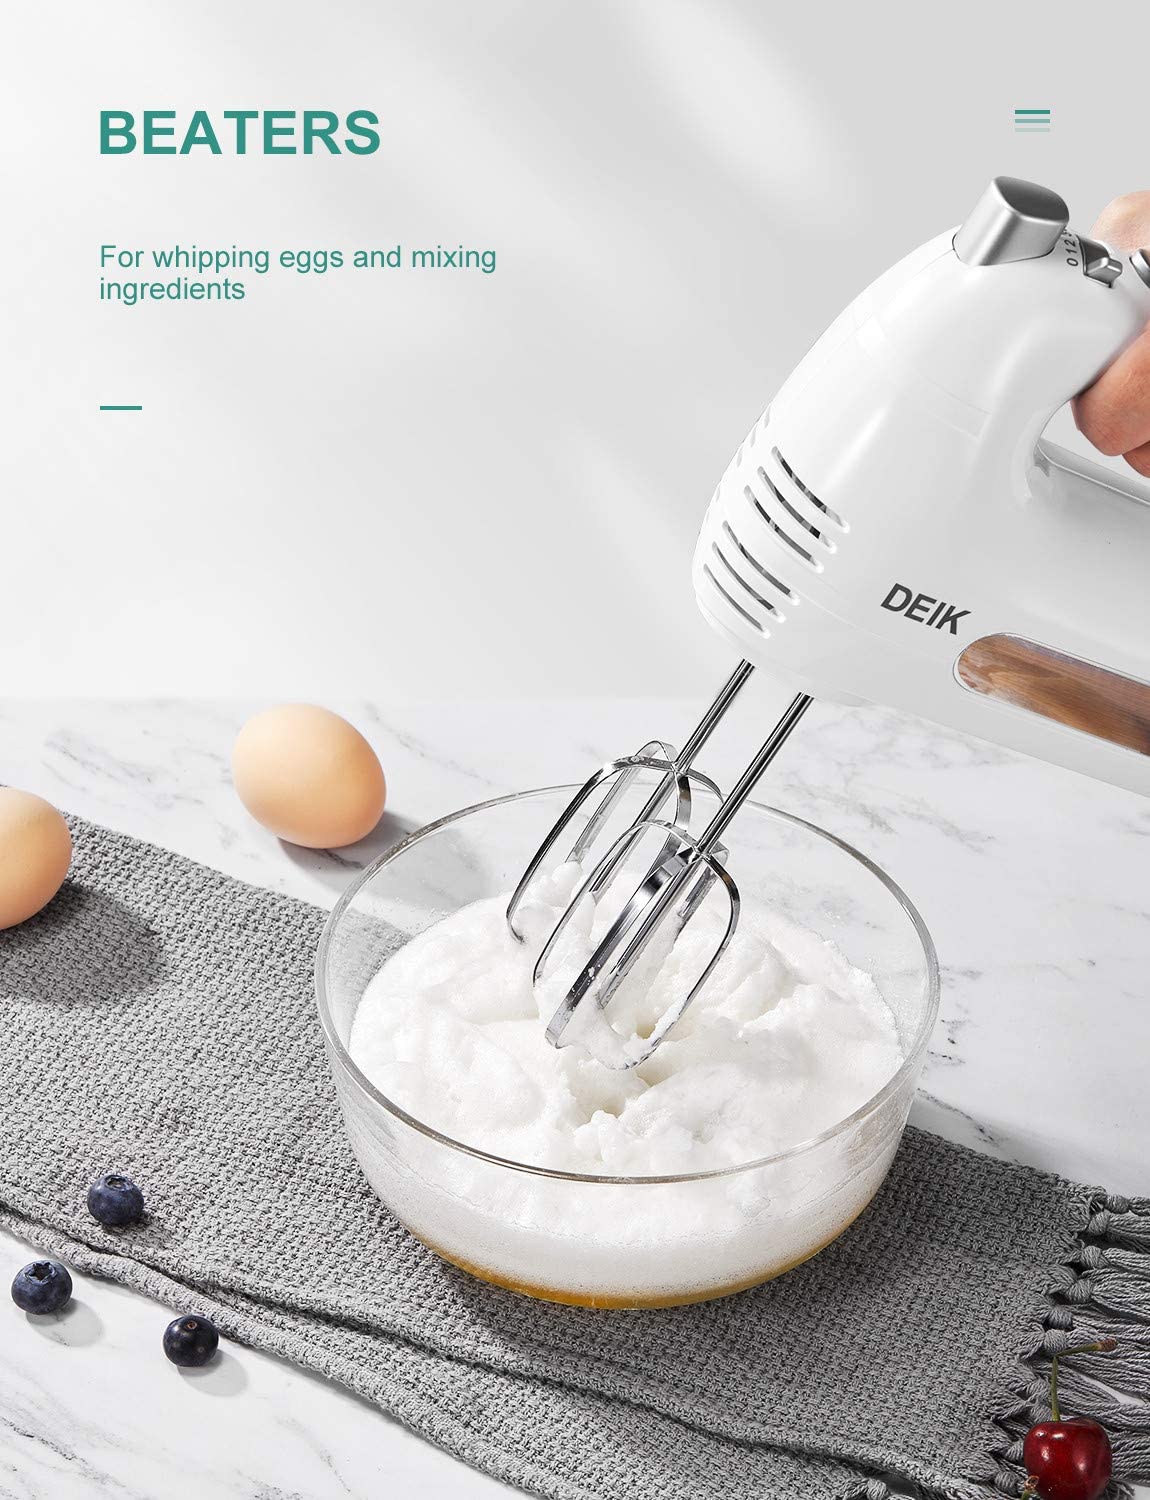 Whisk Dough Hook Household Gifts Kitchen Mixers Egg Beater Handheld Hand  Mixer